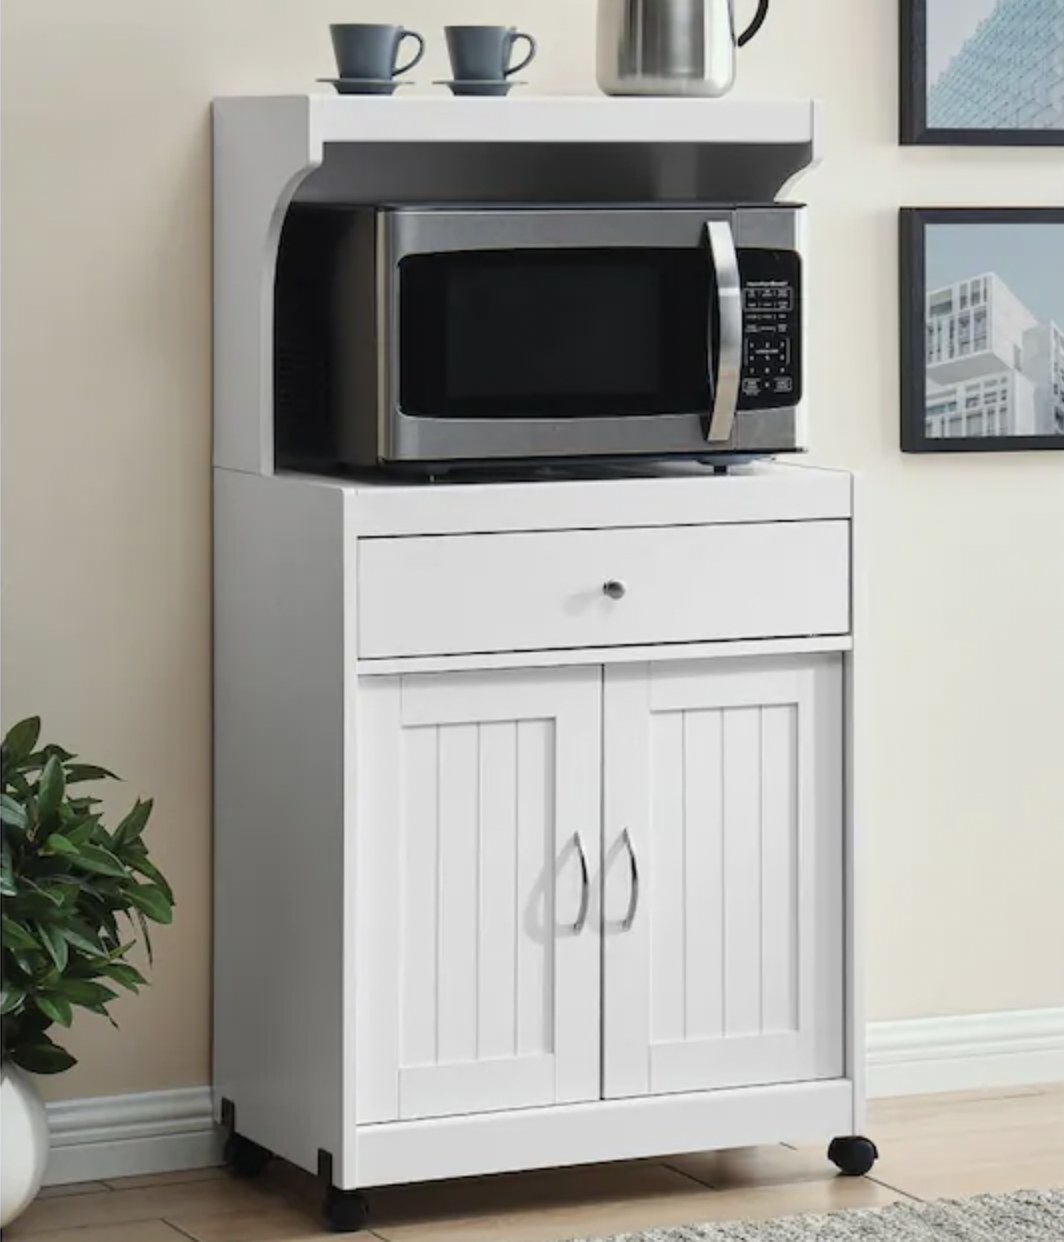 White wooden microwaveable cart with cabinets, shelves and a microwave on top